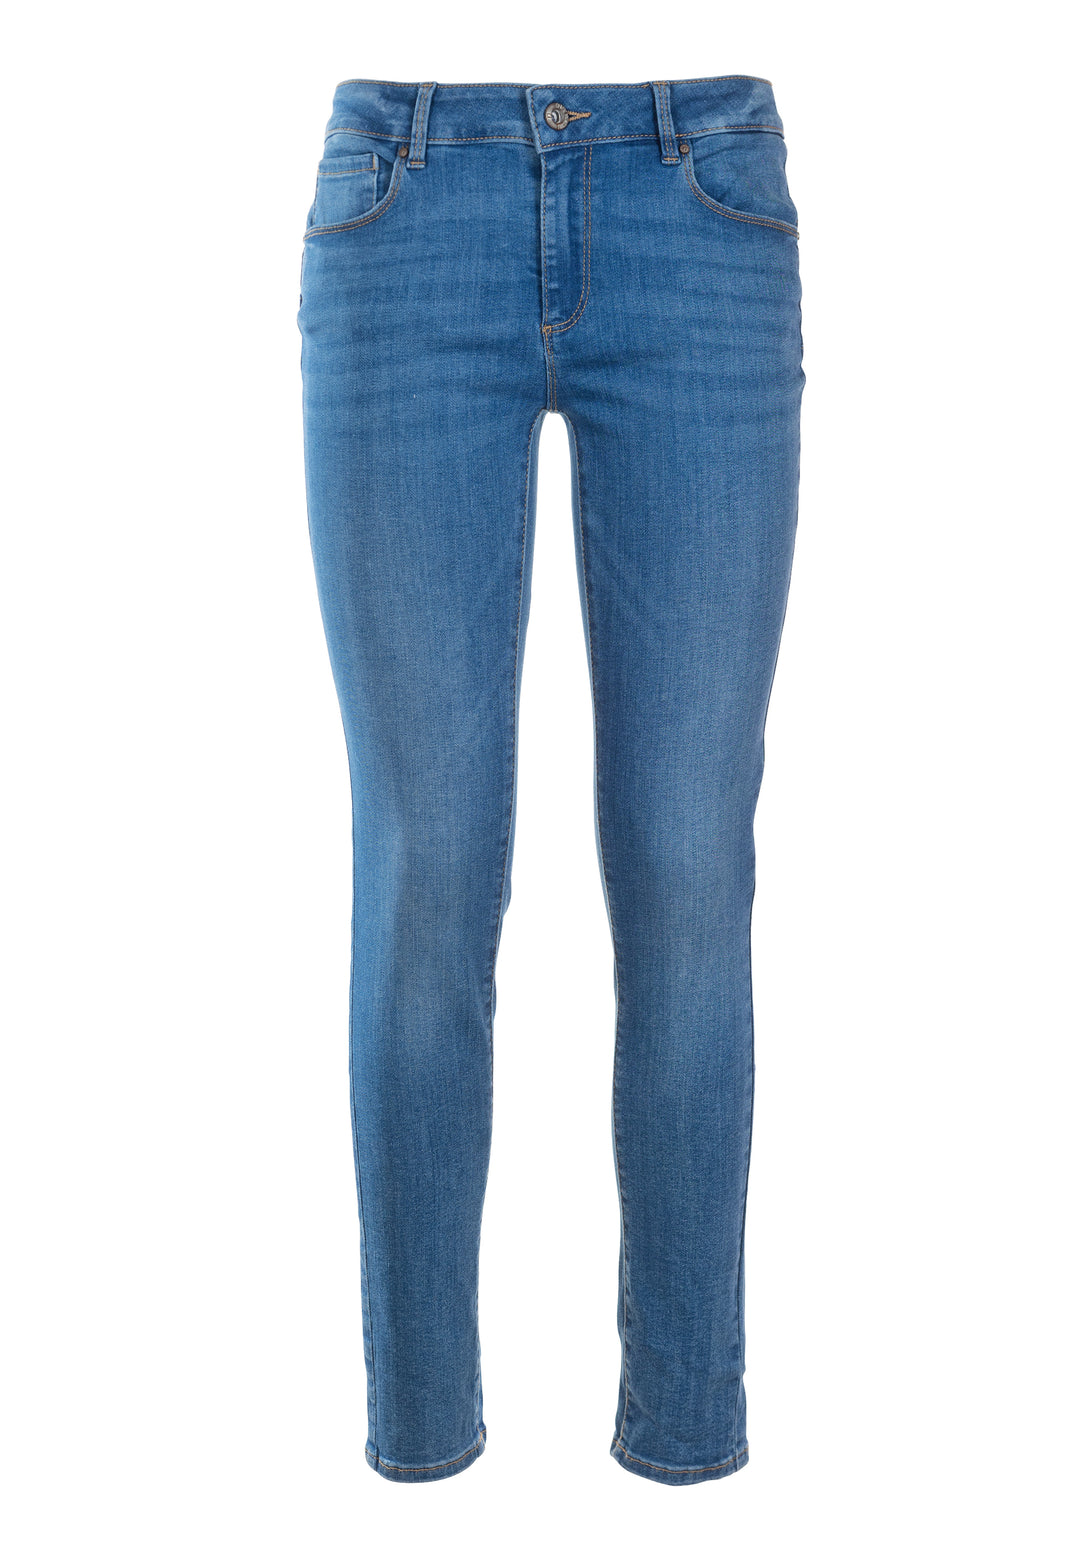 Jeans slim fit push-up effect made in denim with middle wash